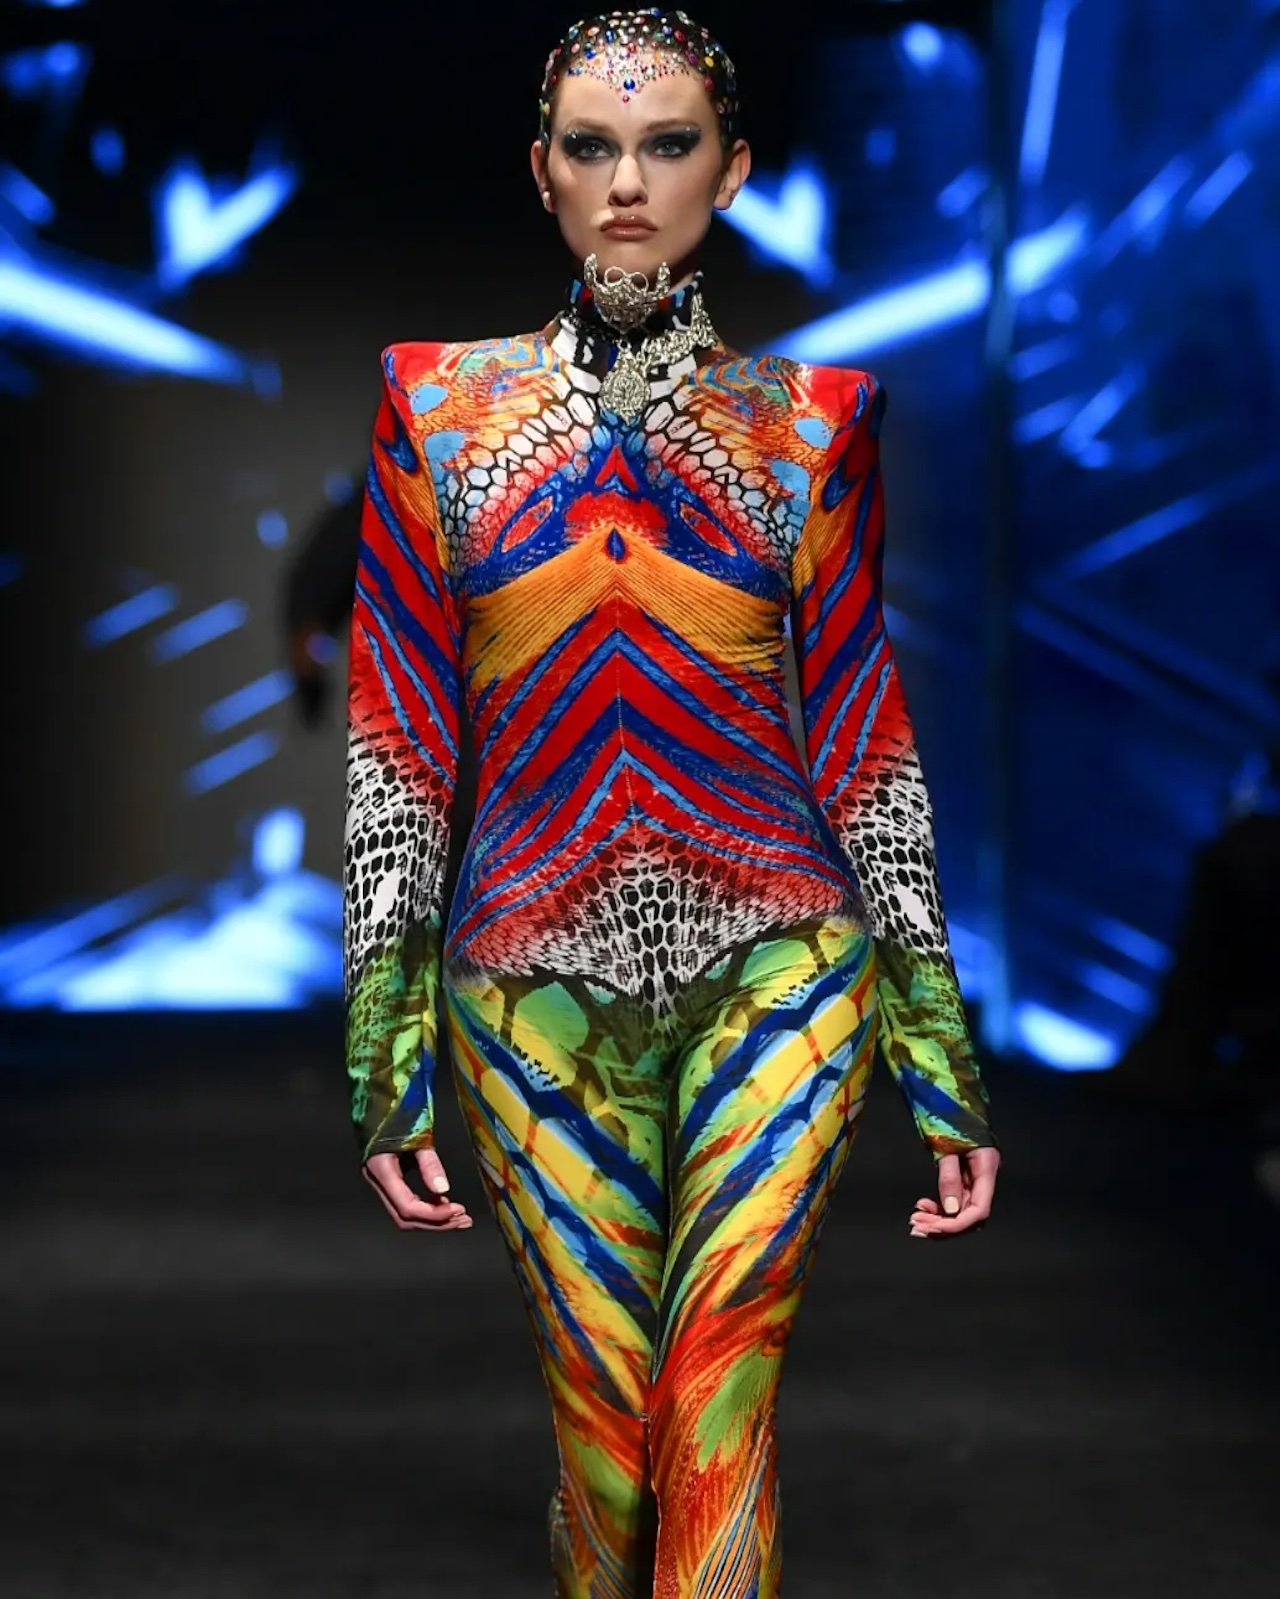 A bold and colorful structured look from Jonathan Guzman at LA Fashion Week